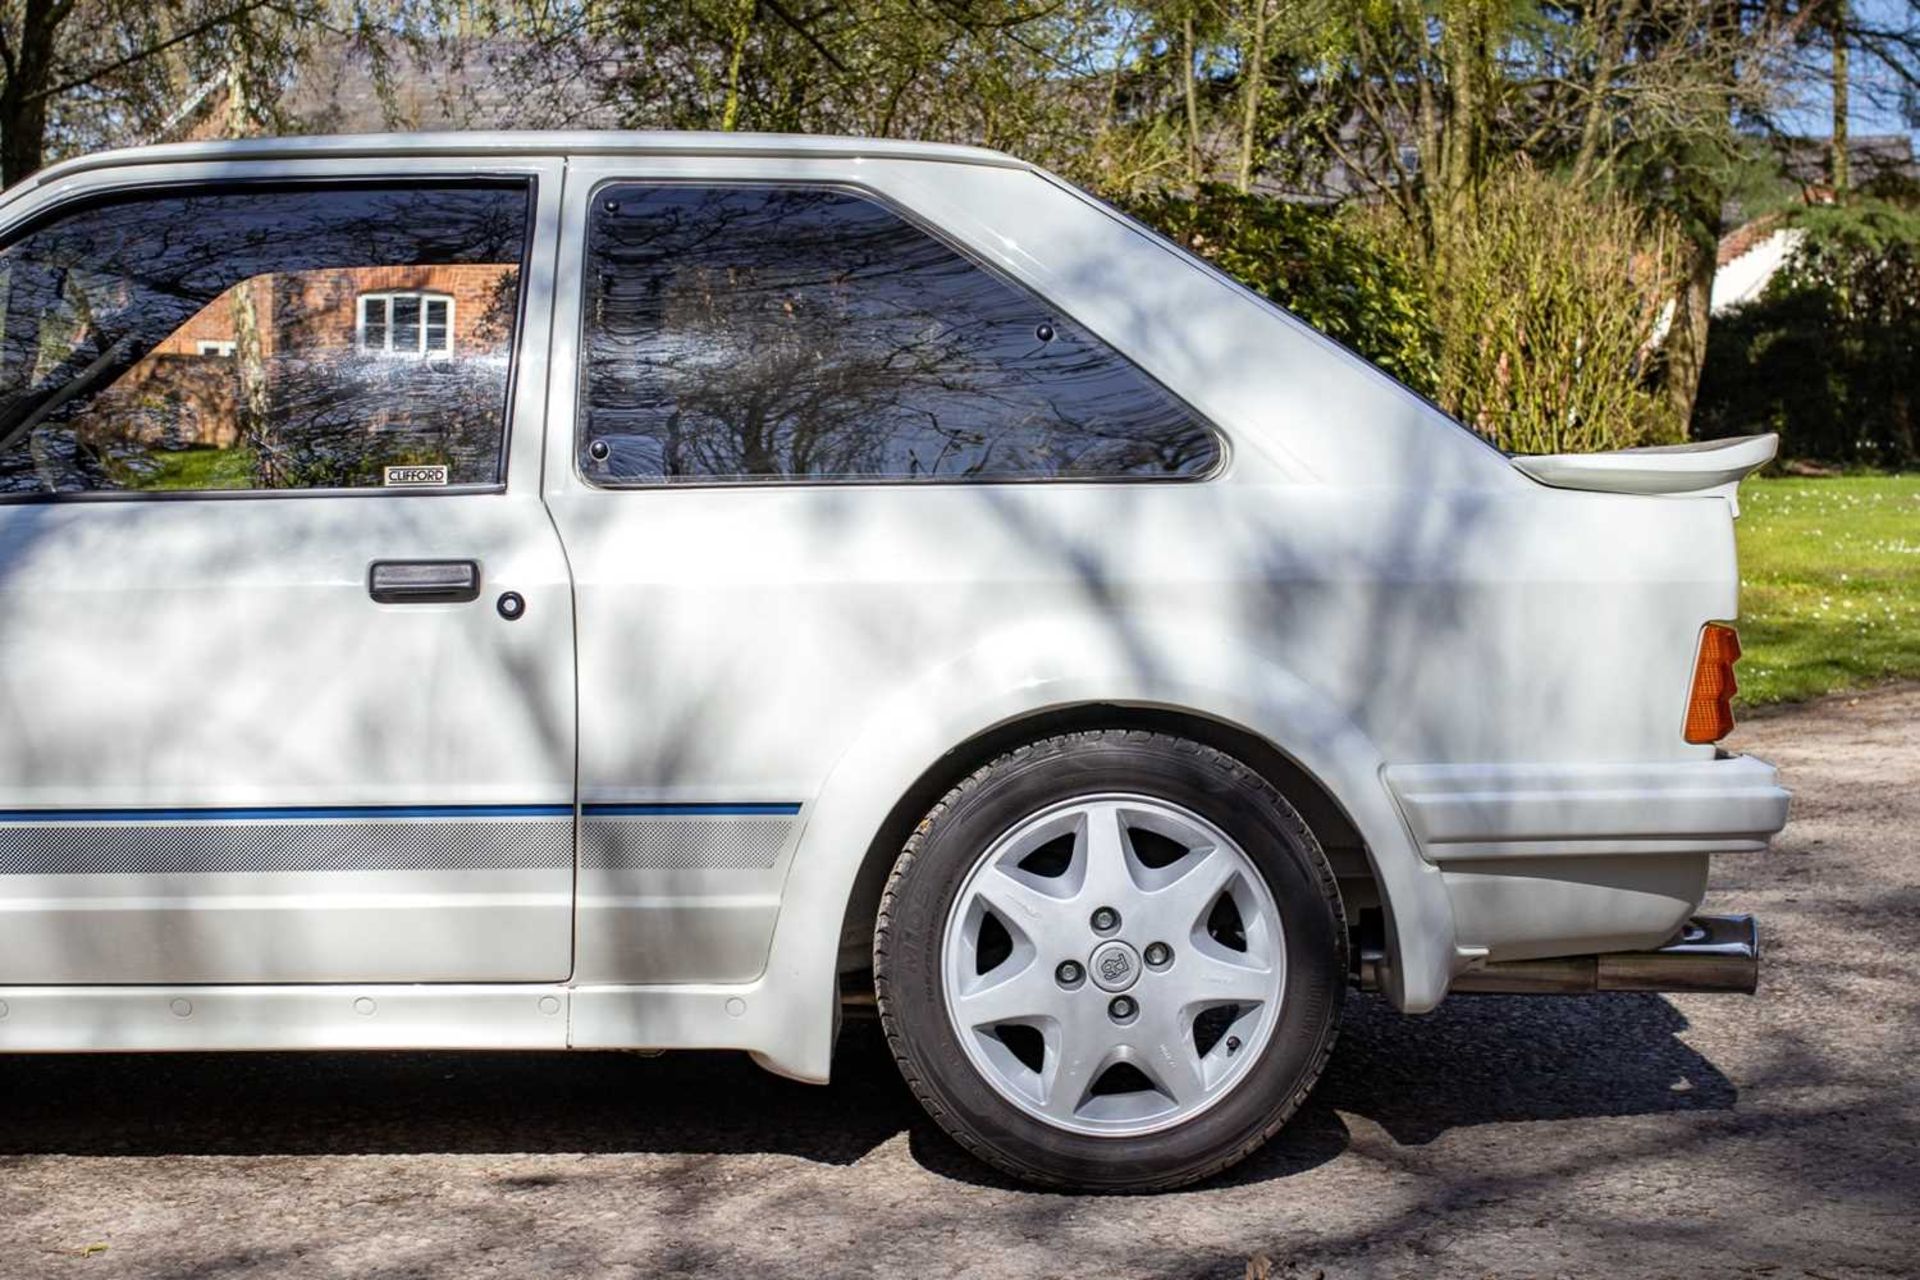 1985 Ford Escort RS Turbo S1 Subject to a full restoration  - Image 30 of 76